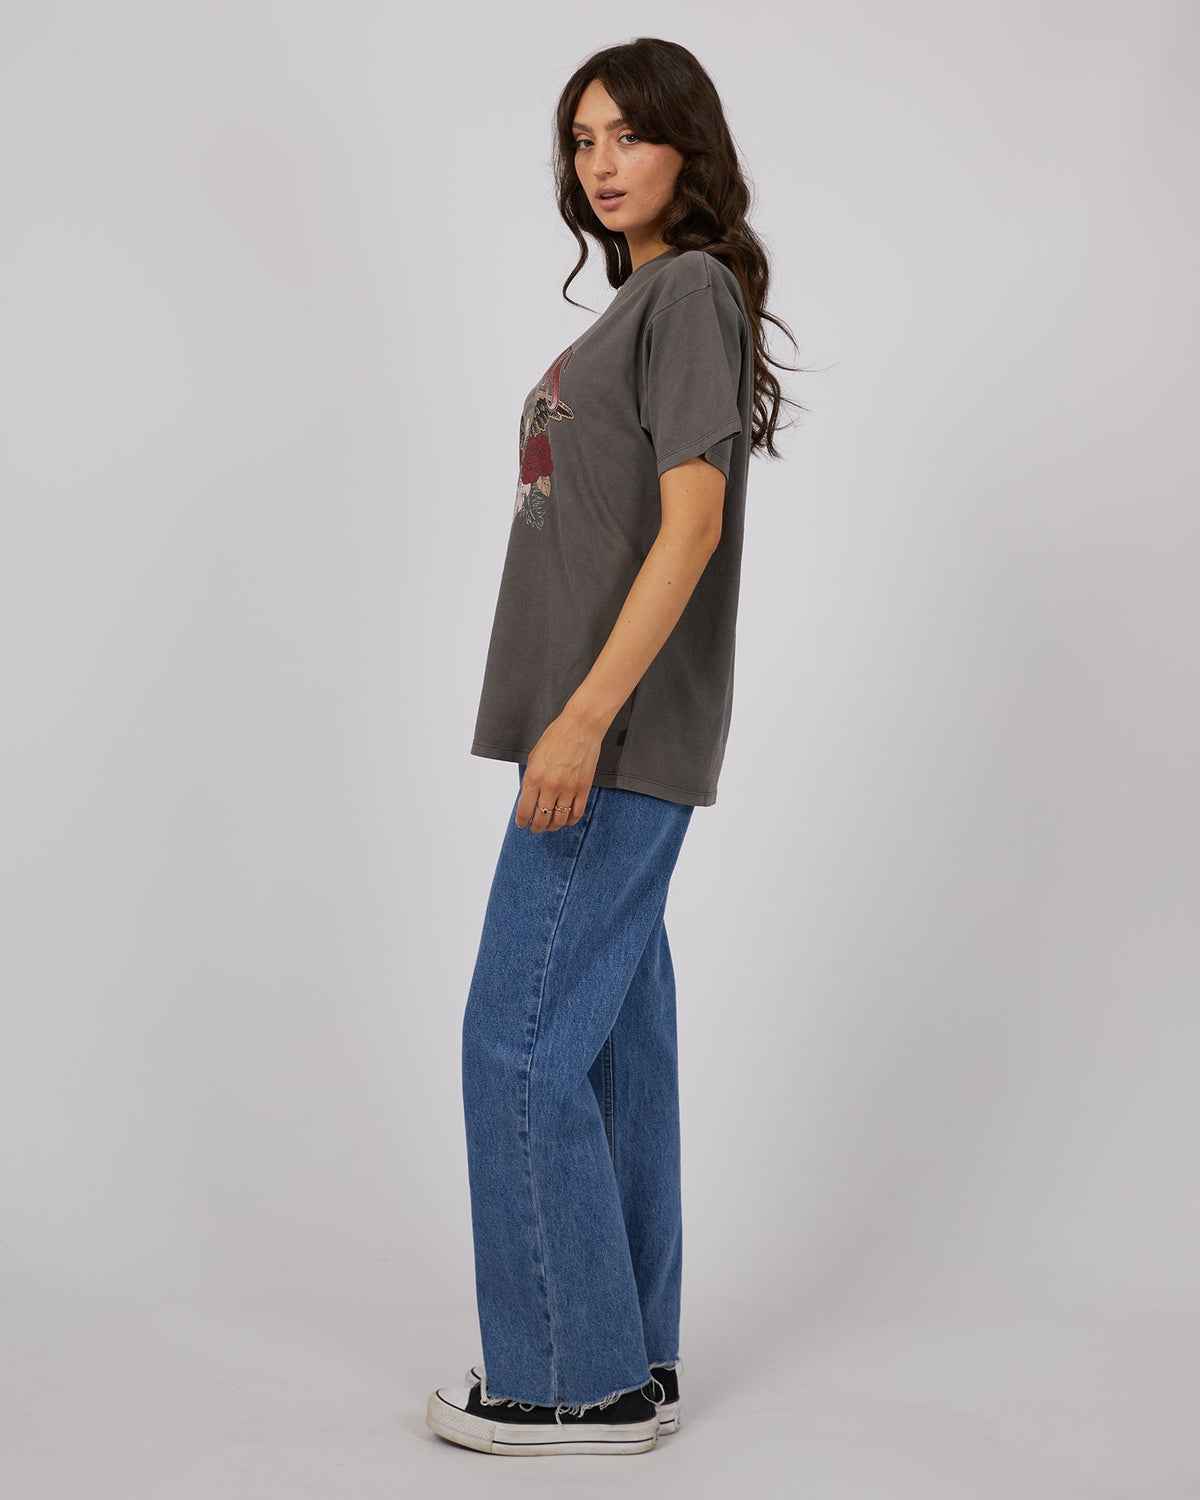 All About Eve-Fearless Oversized Tee Charcoal-Edge Clothing